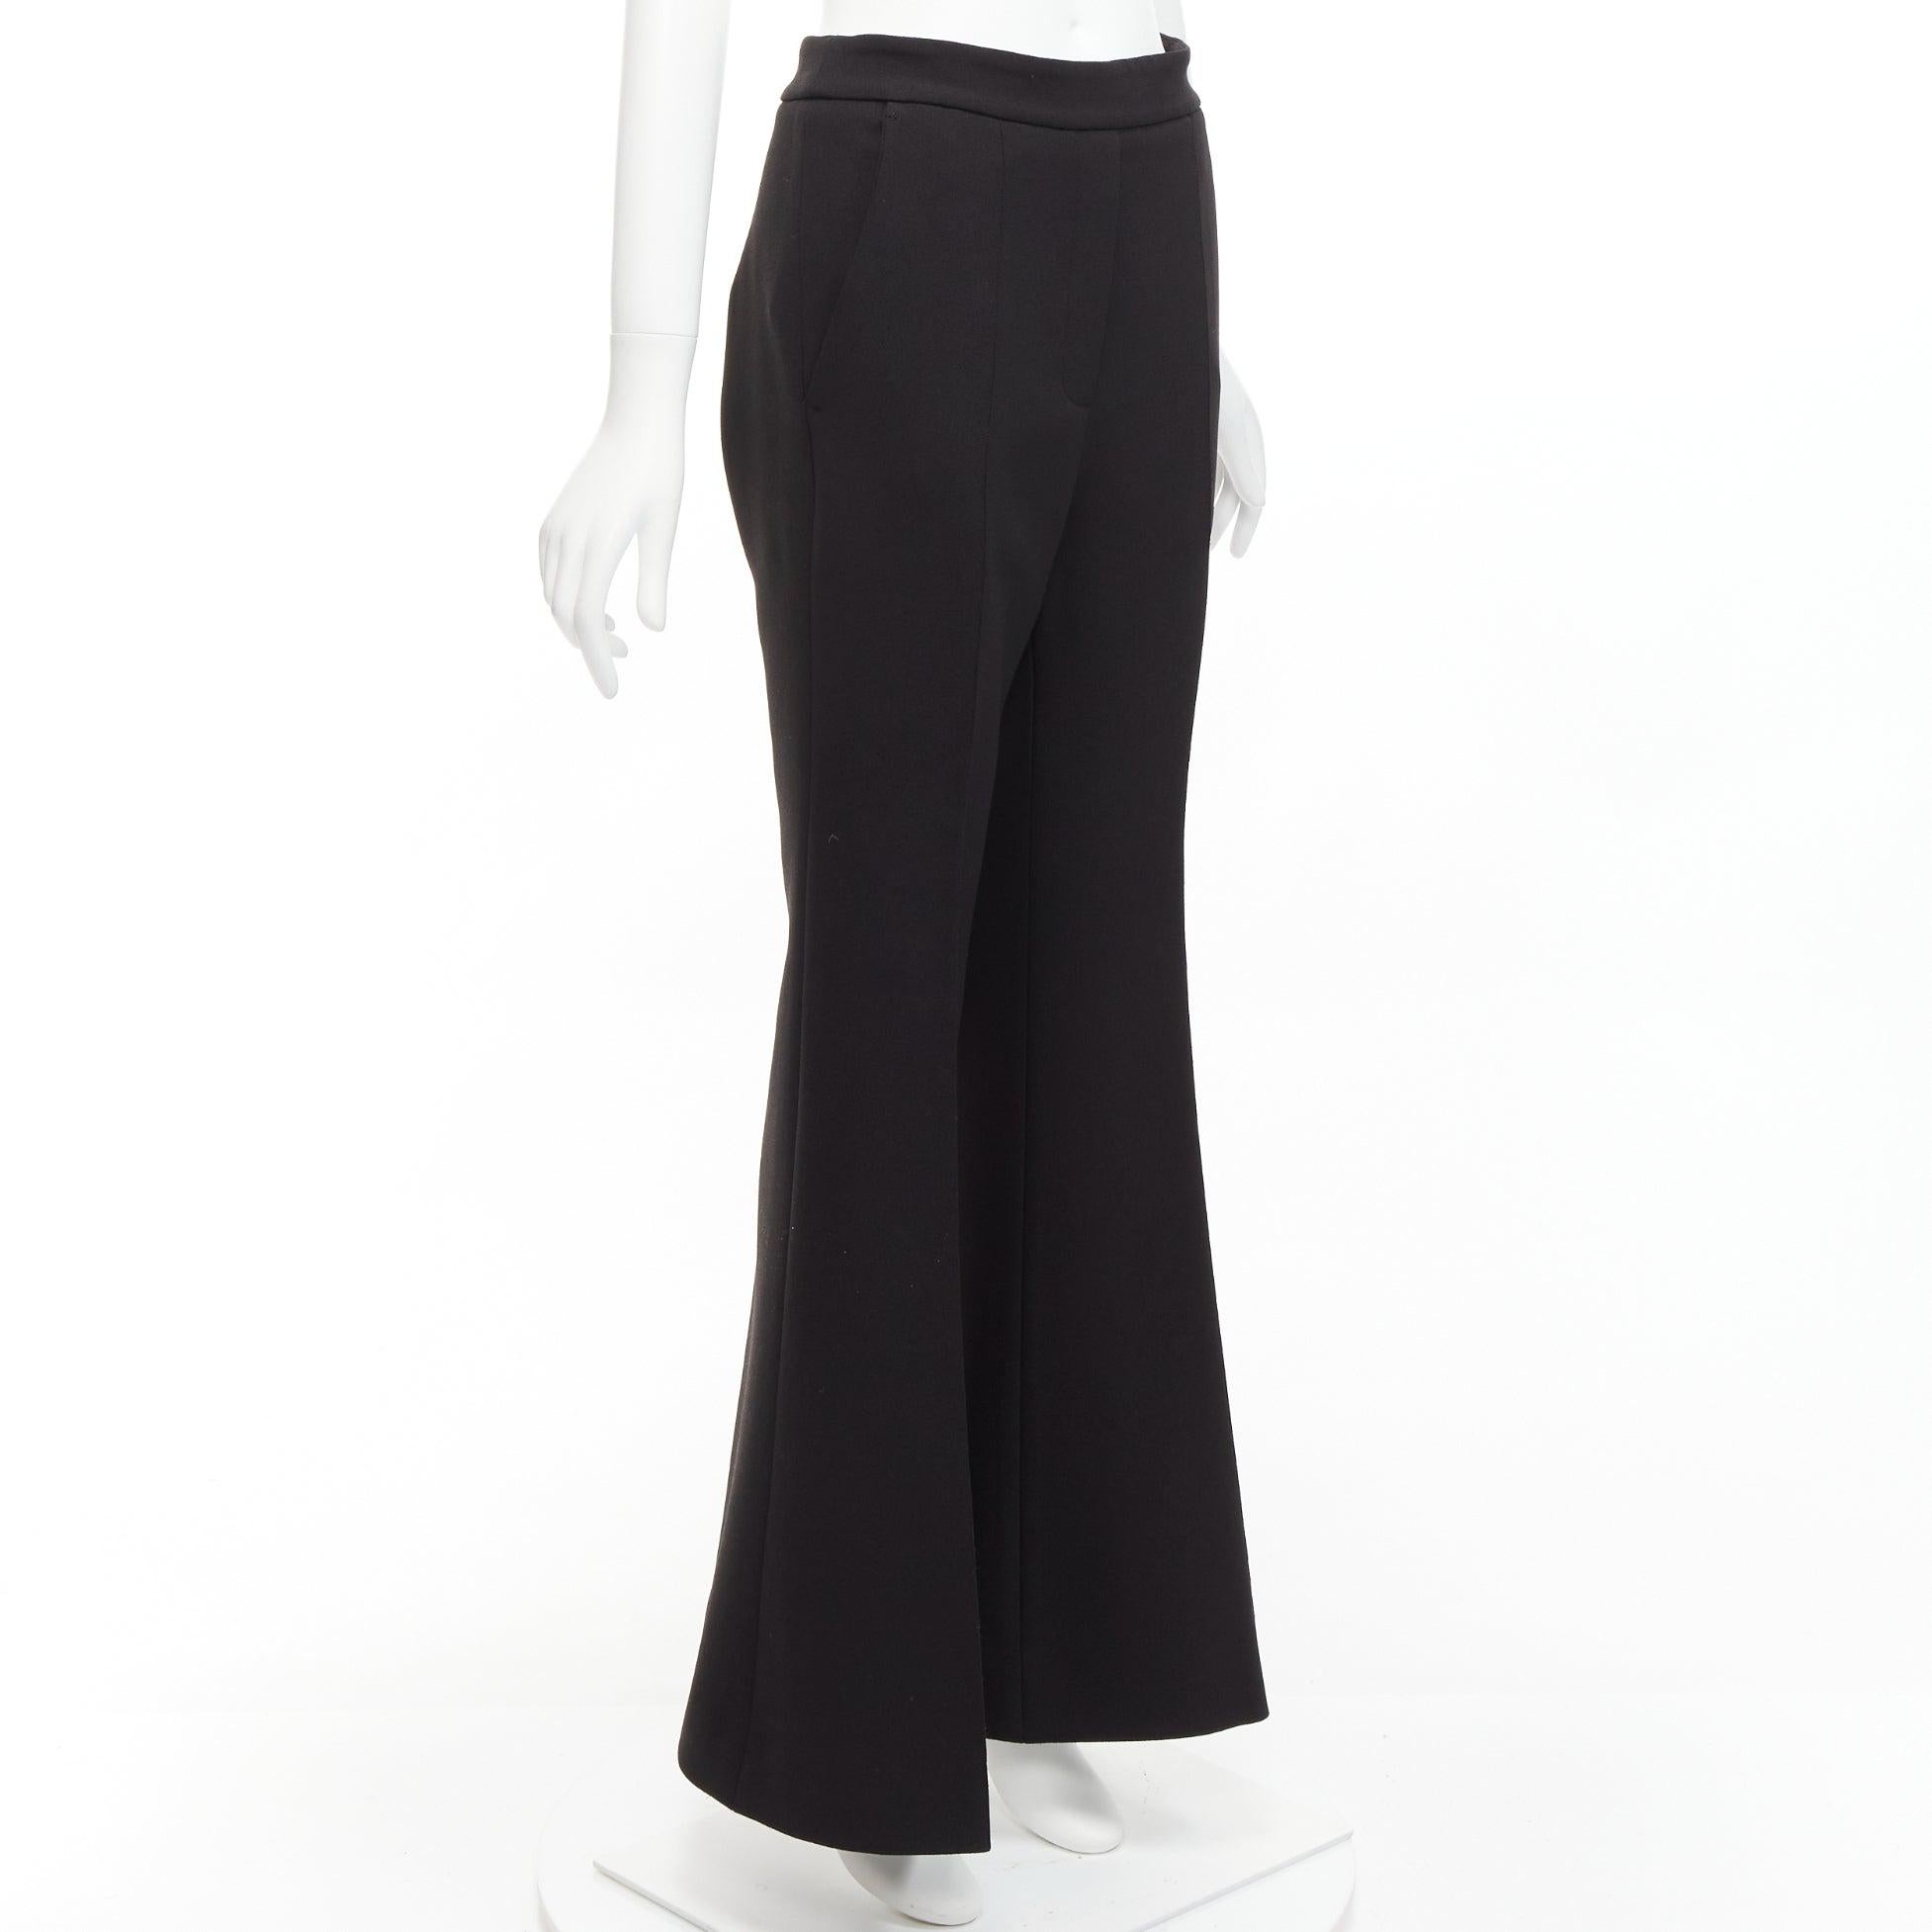 ELLERY black textured crepe minimal classic wide leg flared pants US8 L
Reference: KEDG/A00282
Brand: Ellery
Material: Polyester
Color: Black
Pattern: Solid
Closure: Zip
Extra Details: Side zip.
Made in: Australia

CONDITION:
Condition: Excellent,